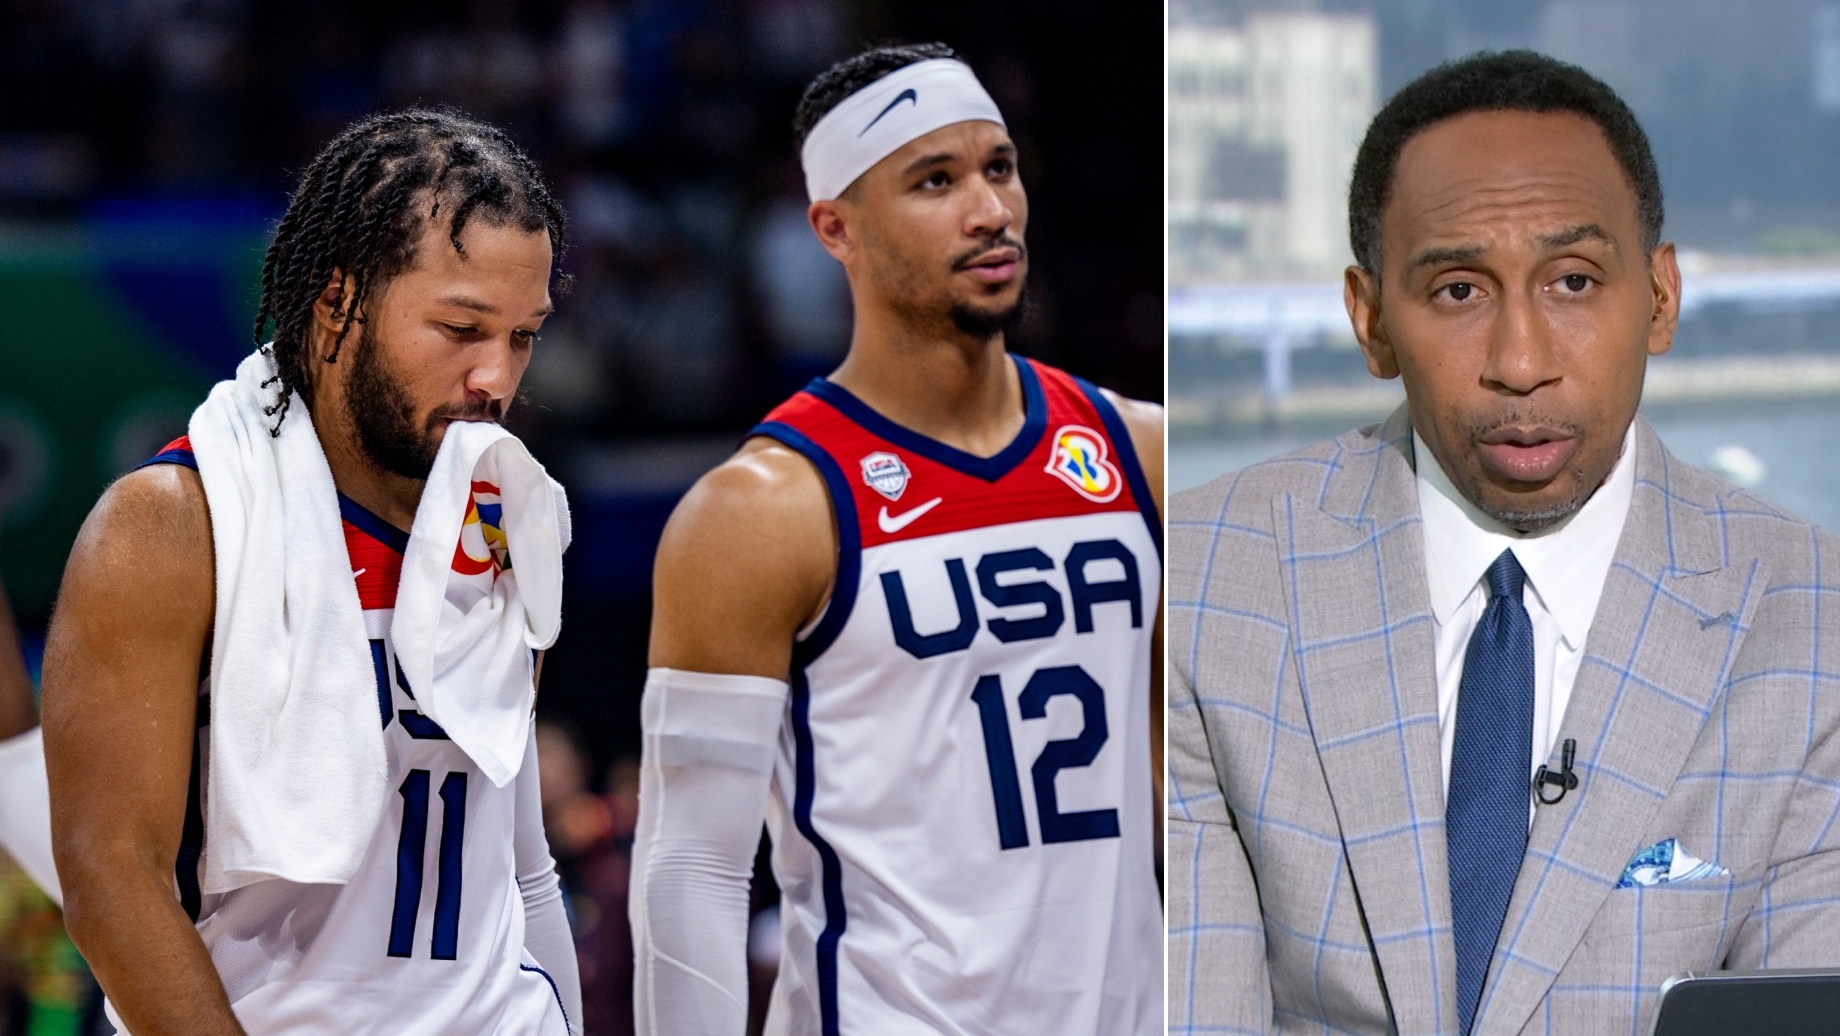 Stephen A. USAs lack of depth exposed in FIBA - Stream the Video